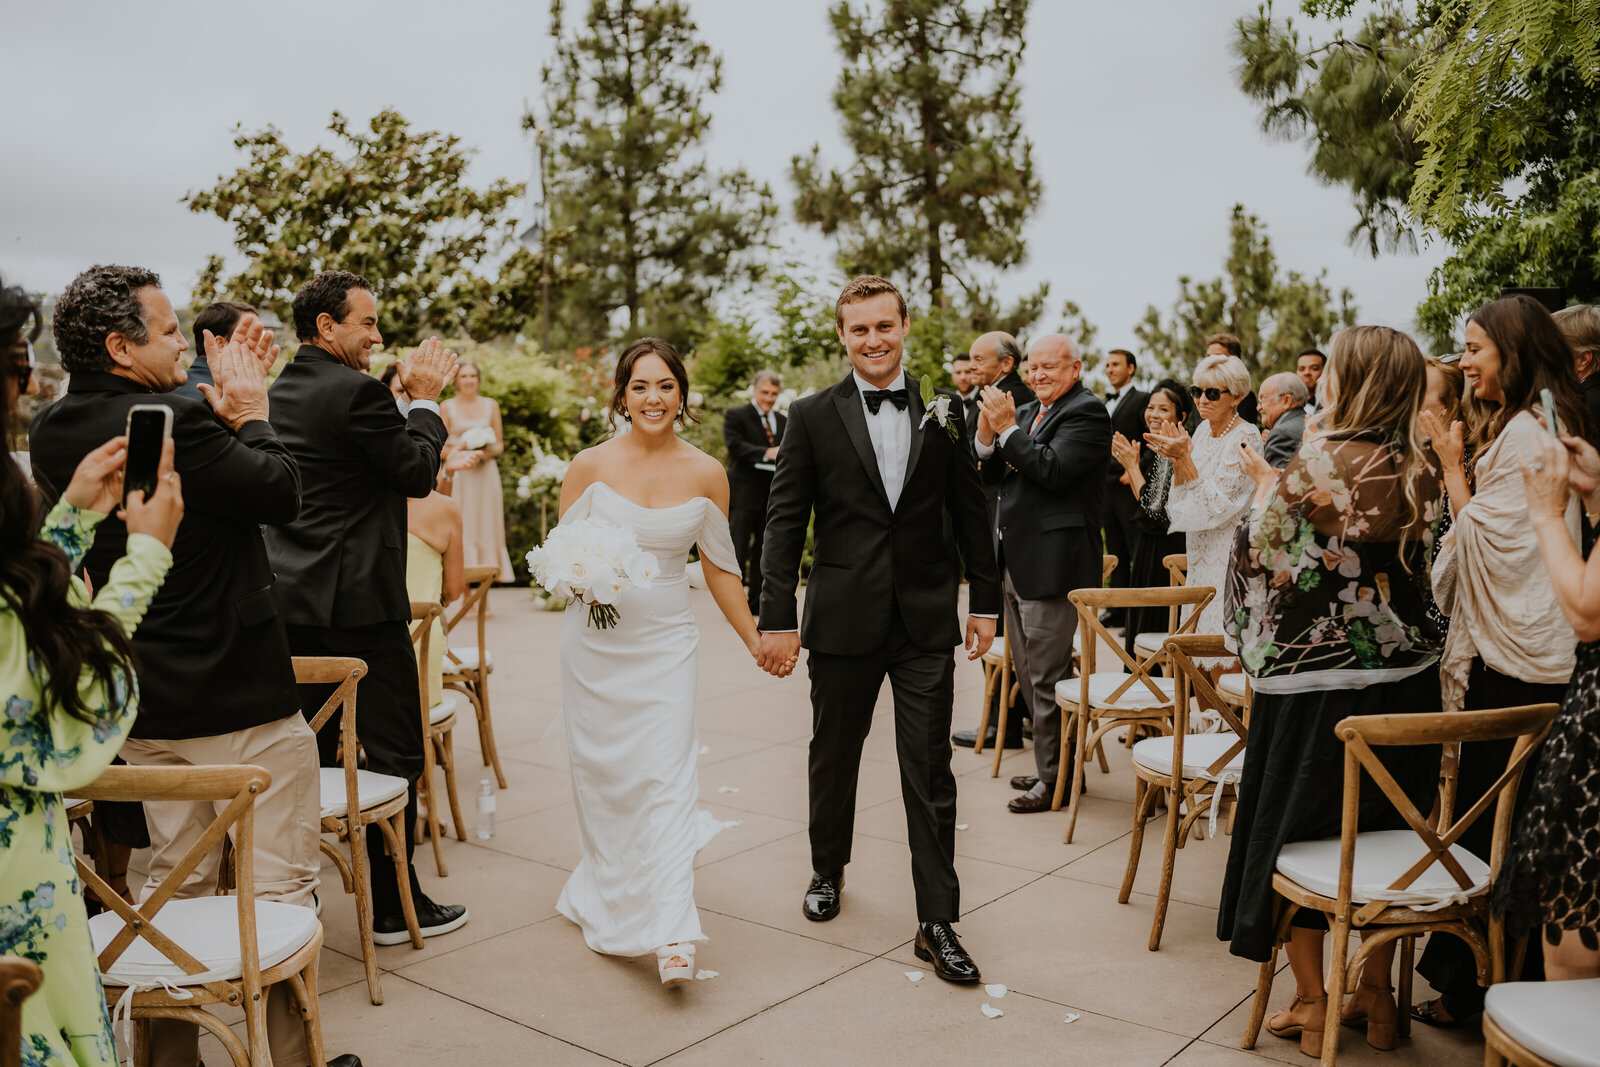 Temecula, California Wedding photographer Yescphotography Bride and Groom after I do